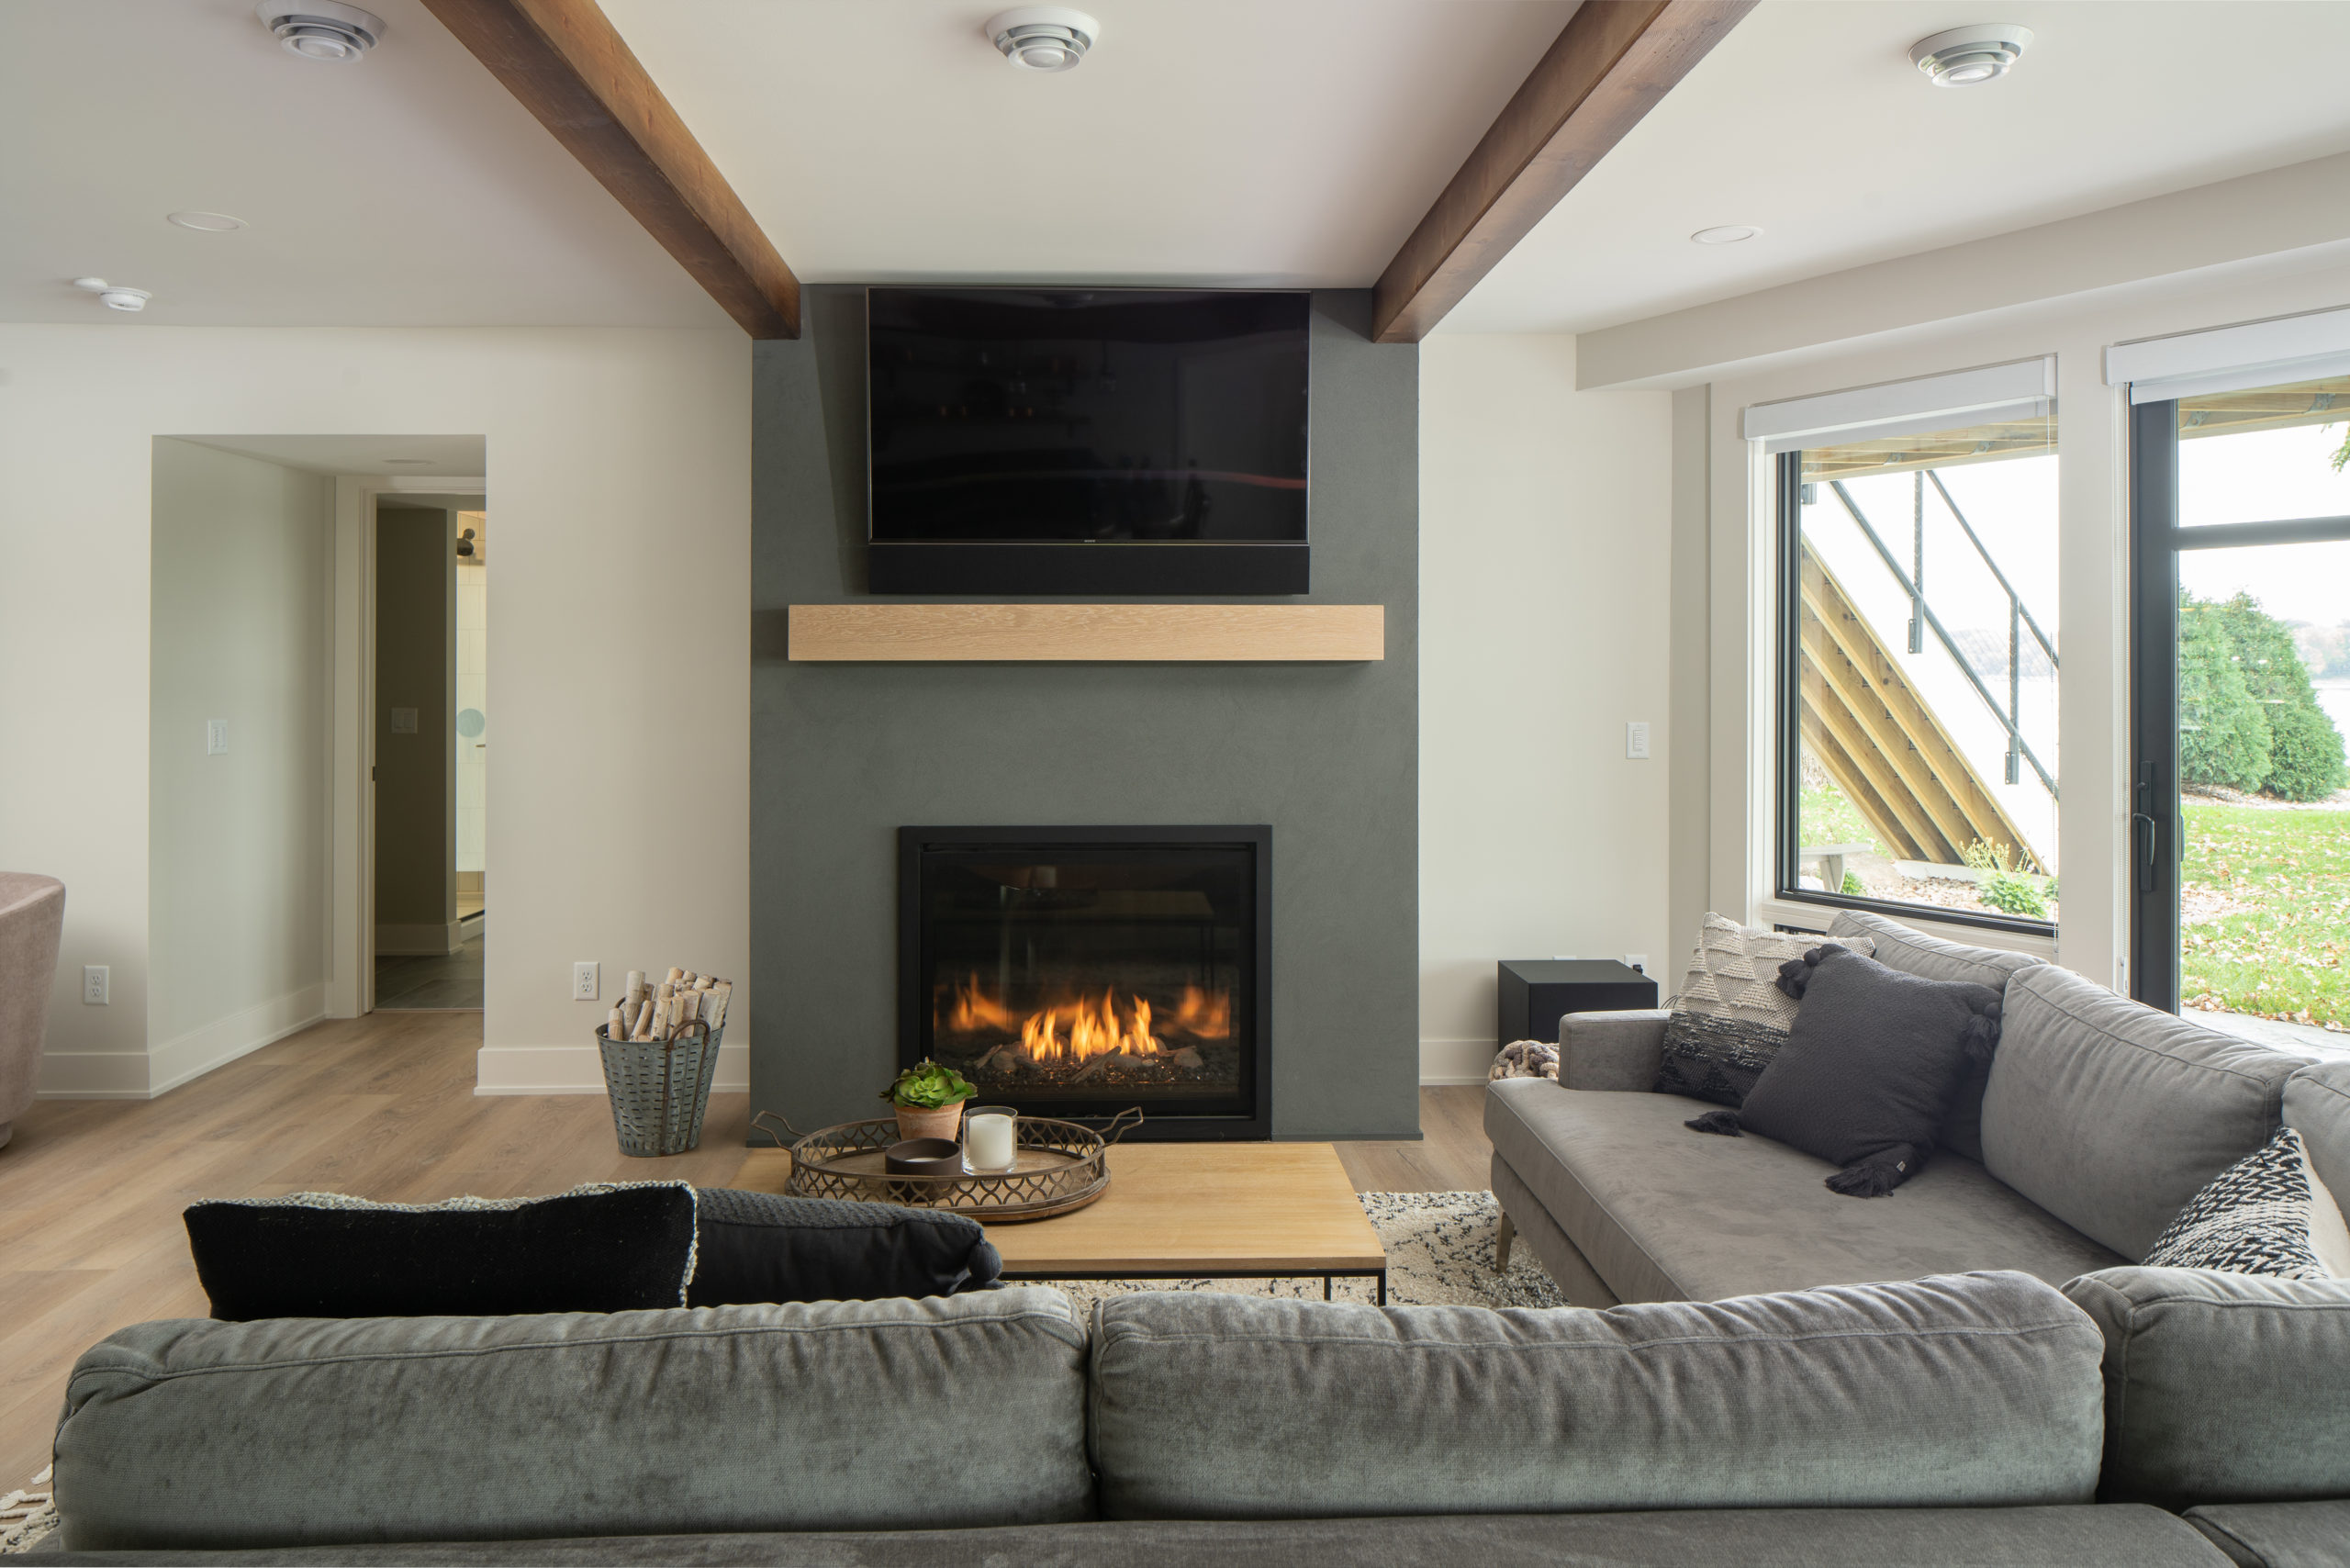 The Lake Escape custom home remodel enhanced with a cozy fireplace in the living room.